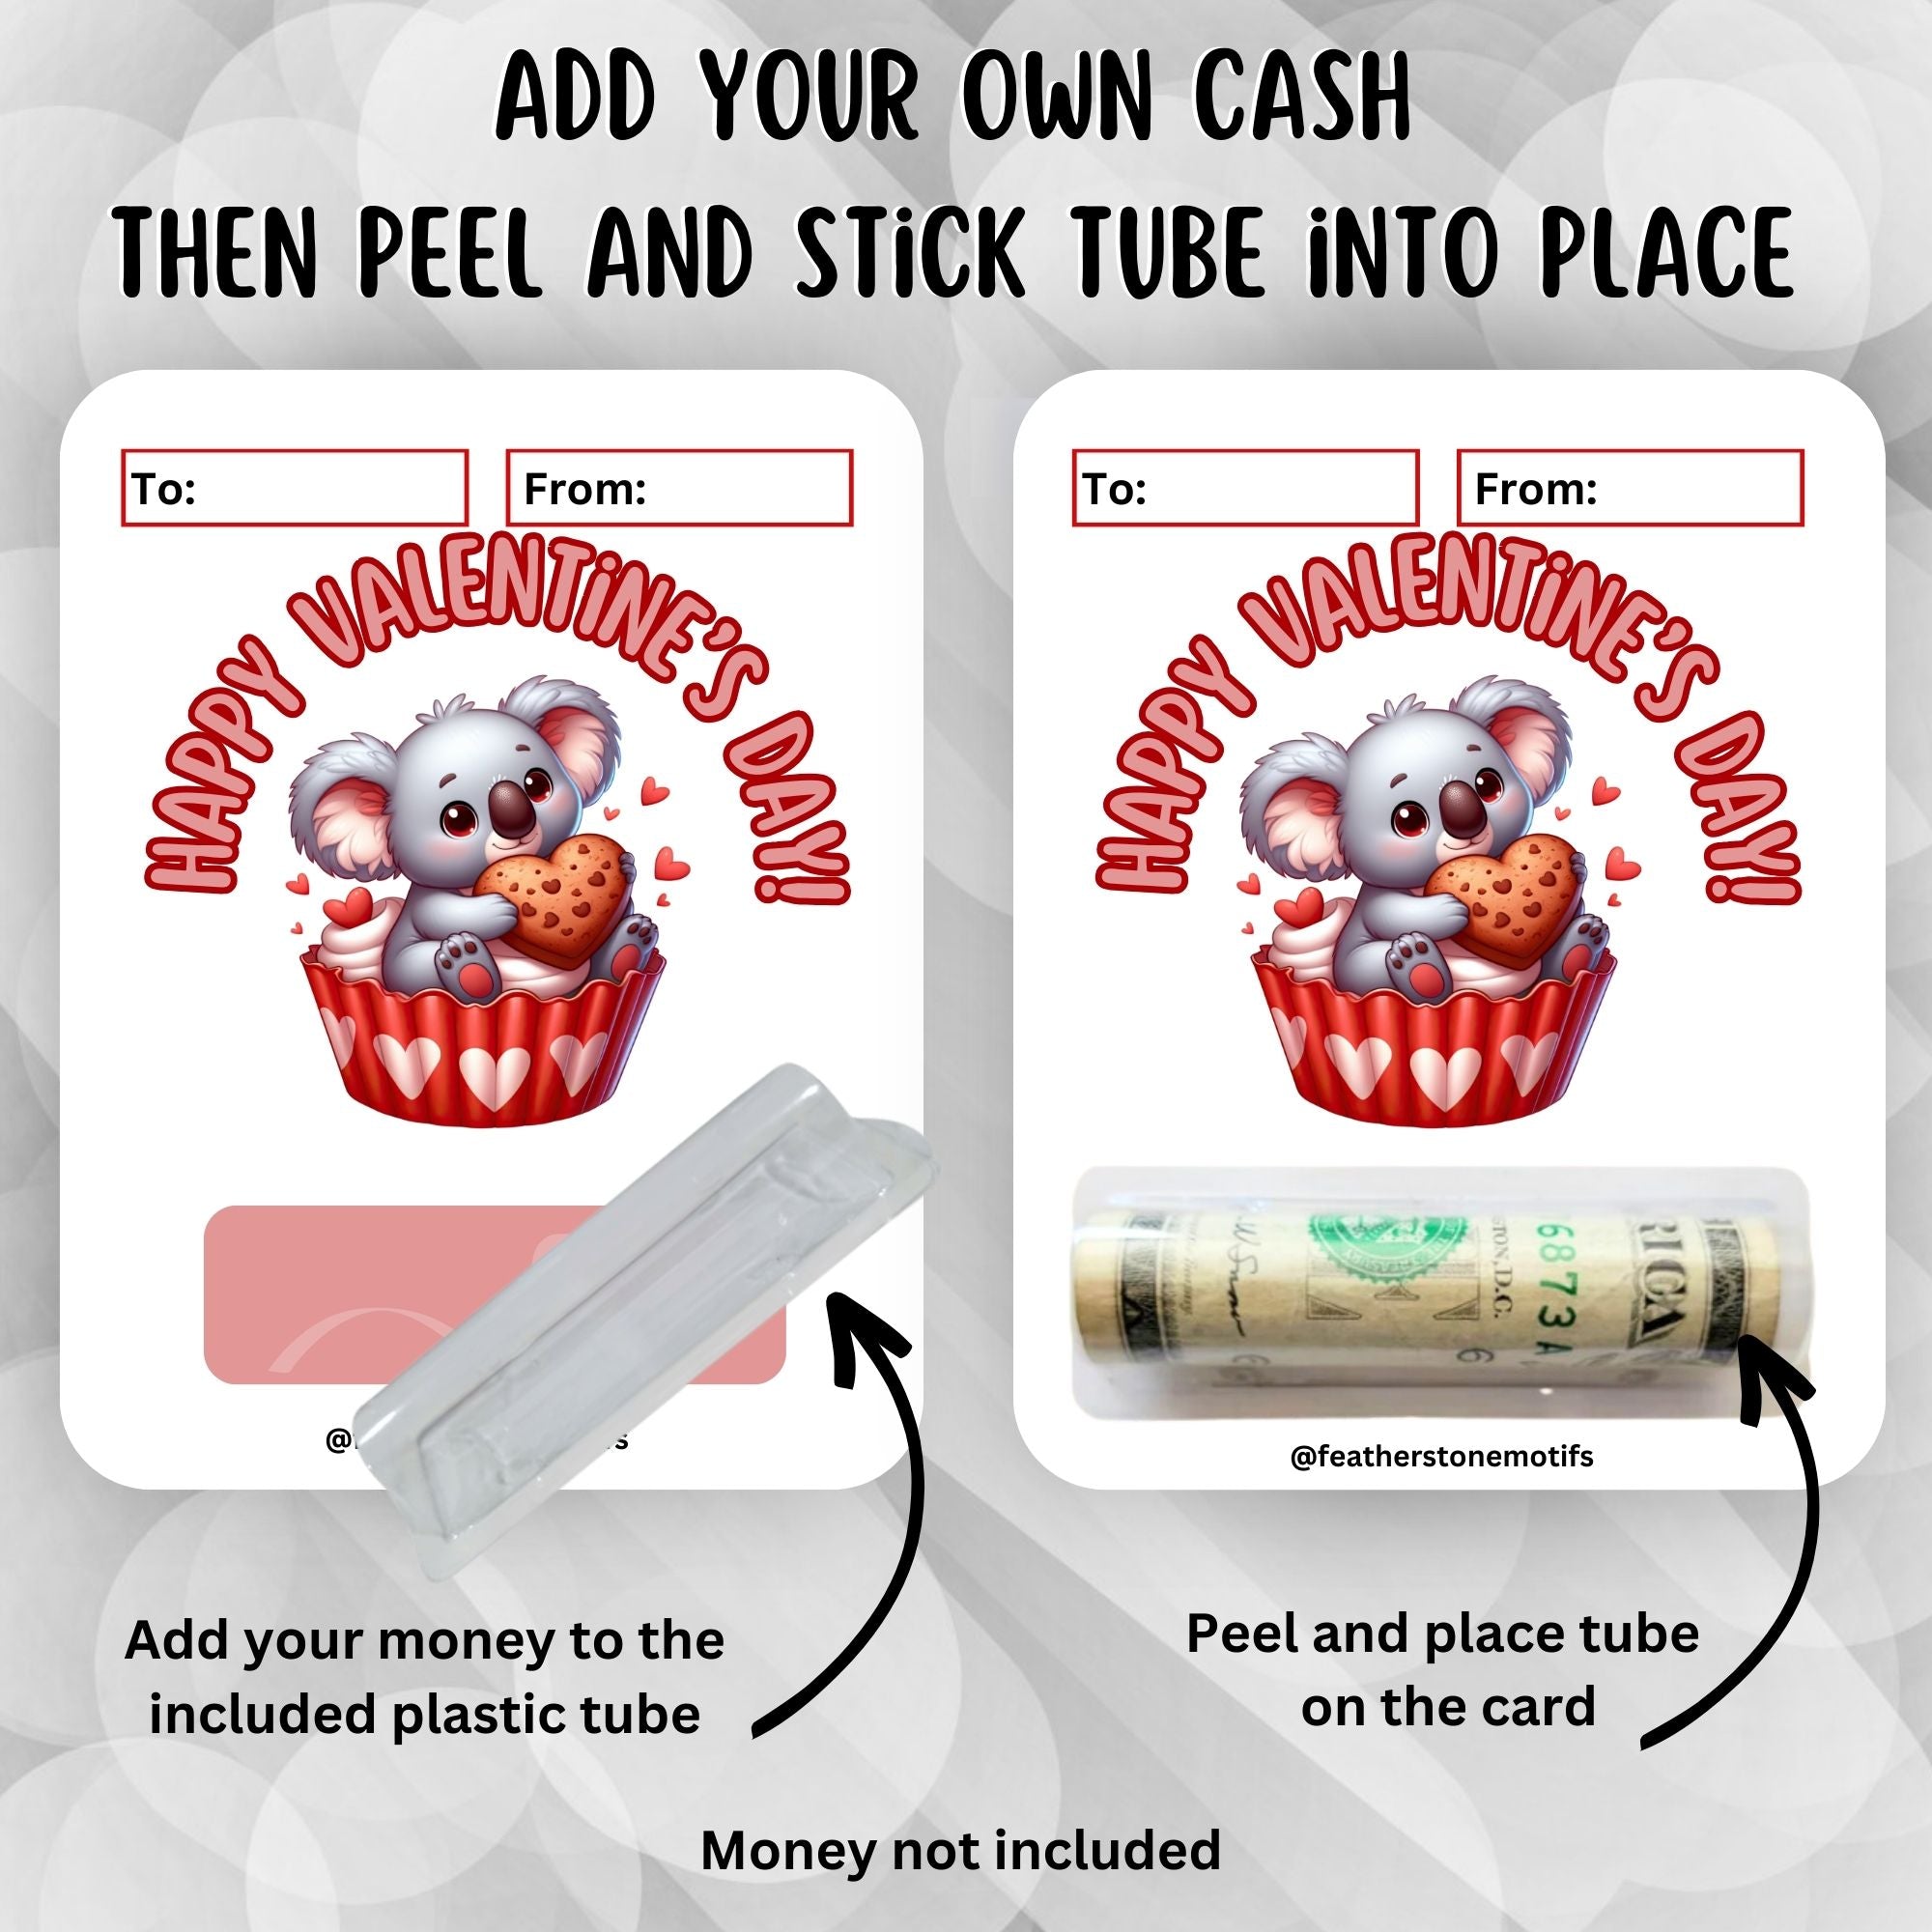 This image shows how to attach the money tube to the Koala Valentine Money Card.